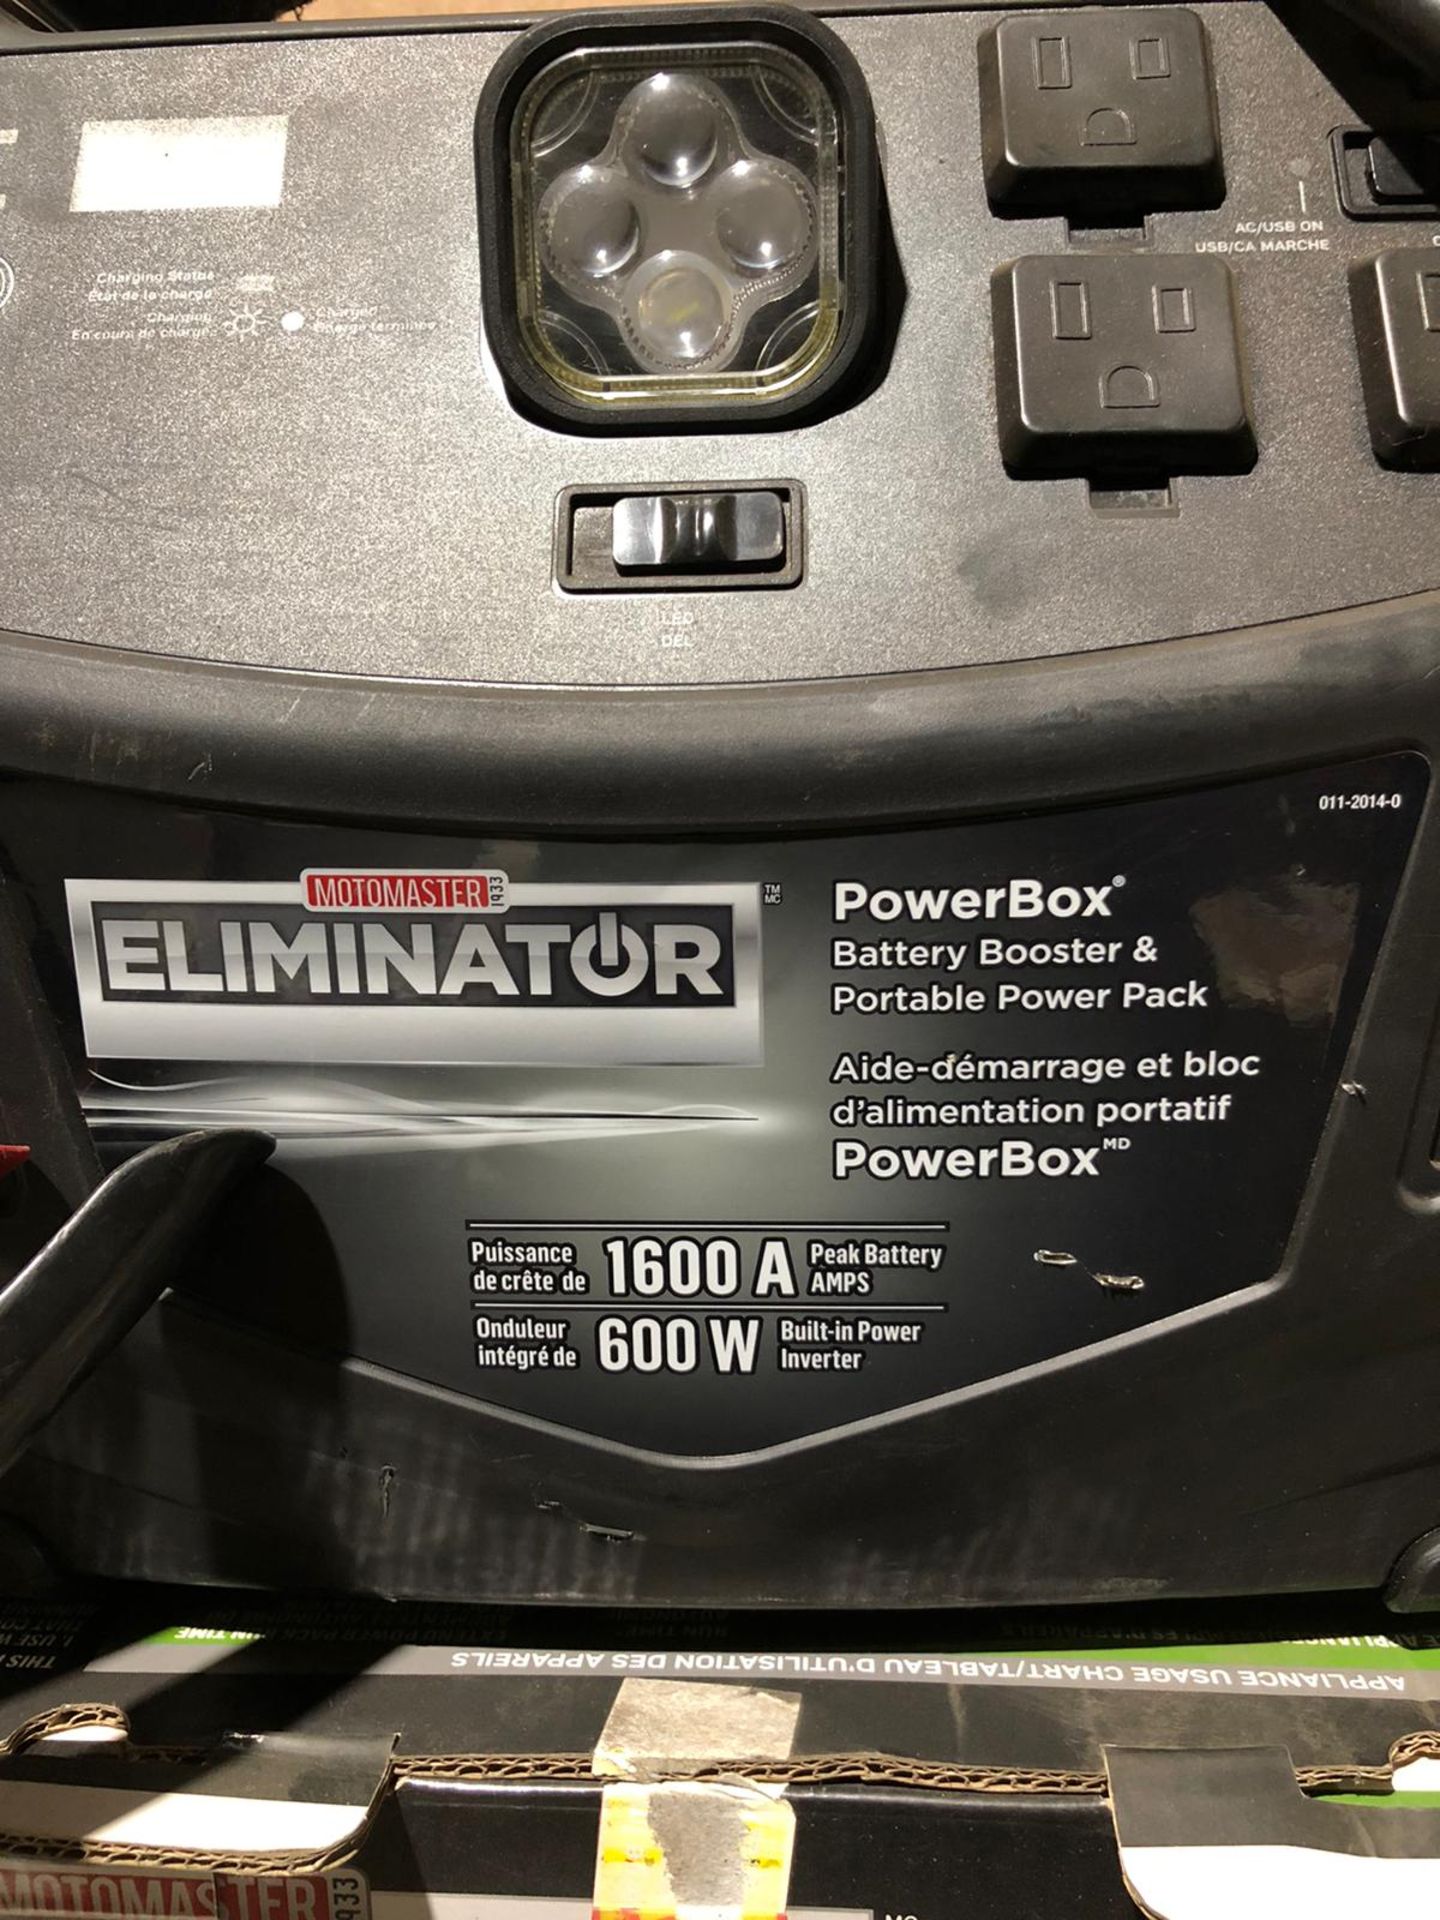 Eliminator Powerbox Battery Booster unit 1600A 600W portable power pack - Image 3 of 3